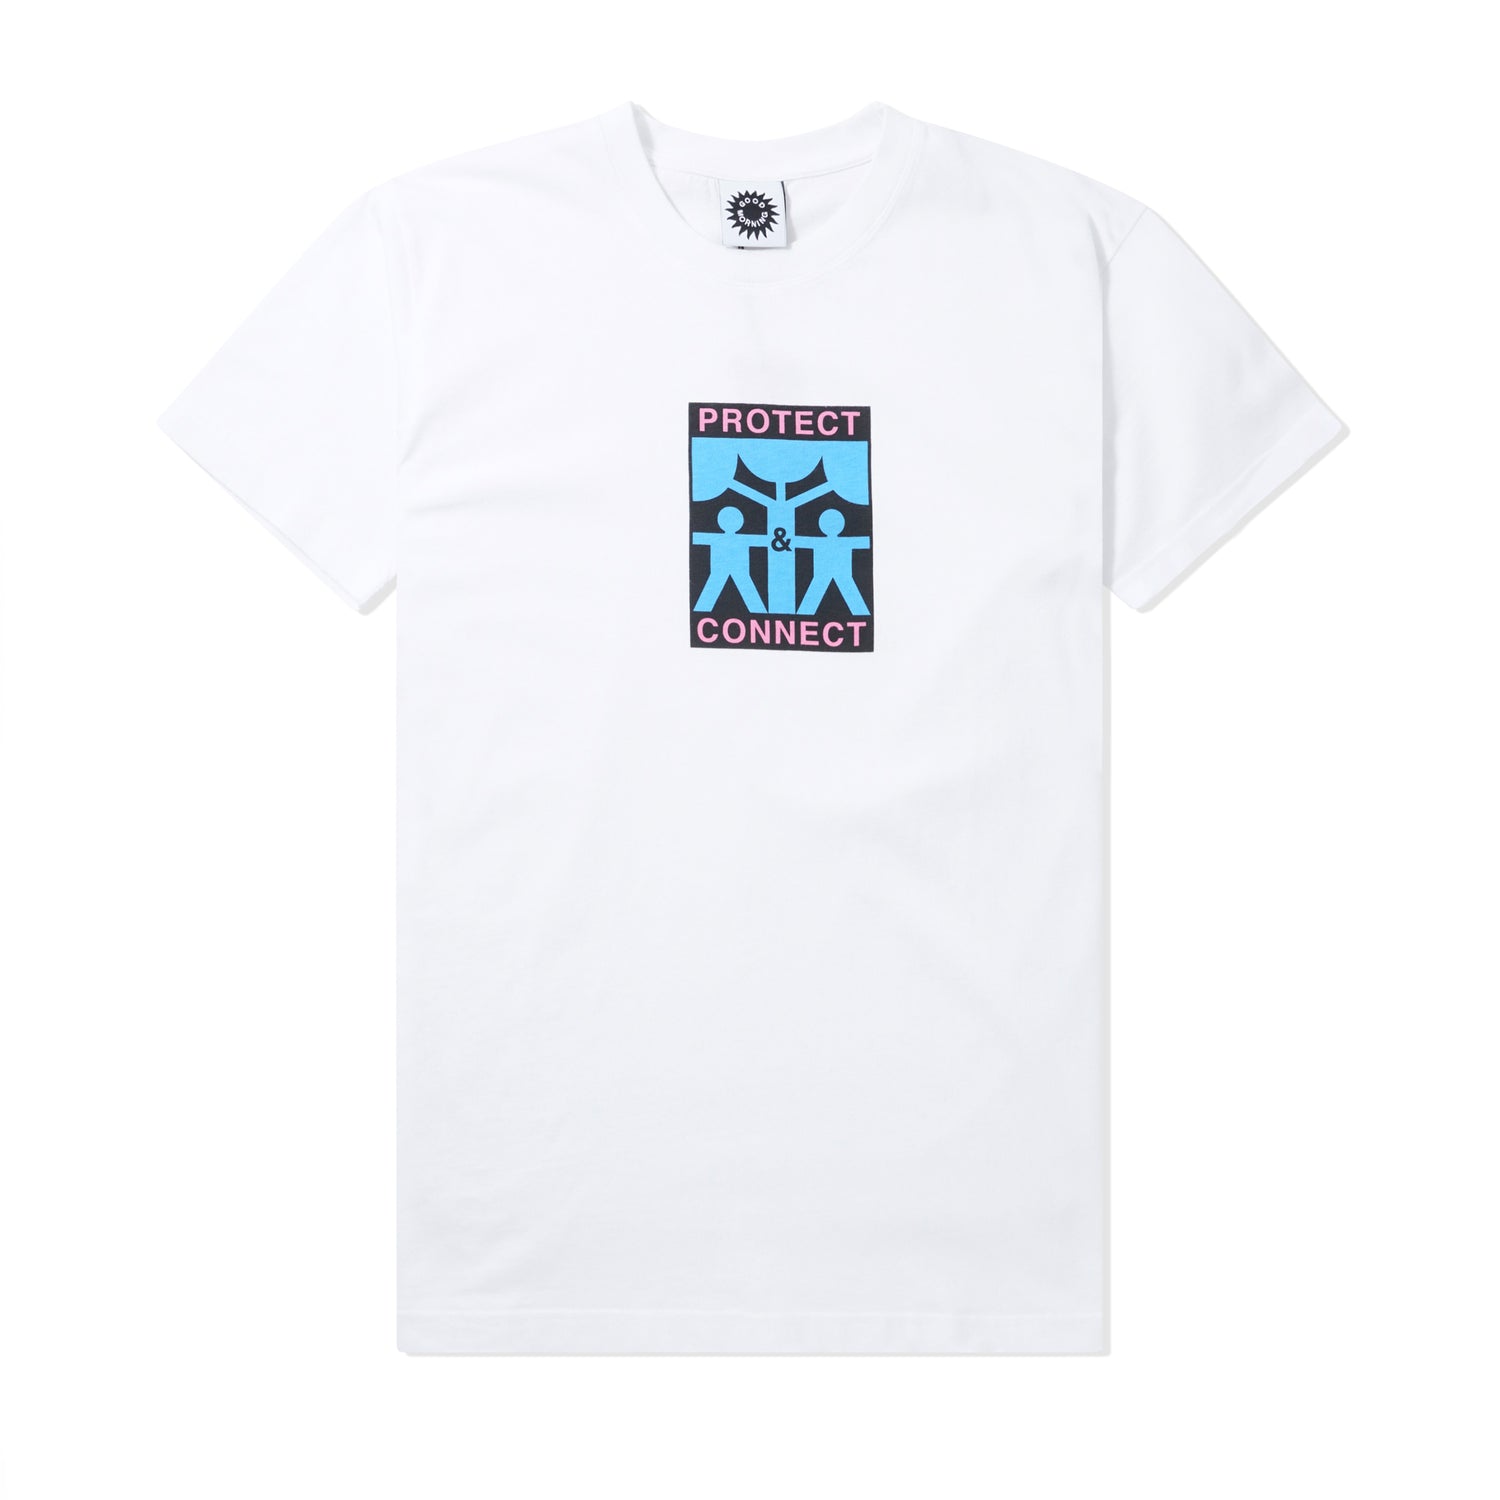 Protect & Connect Tee, White